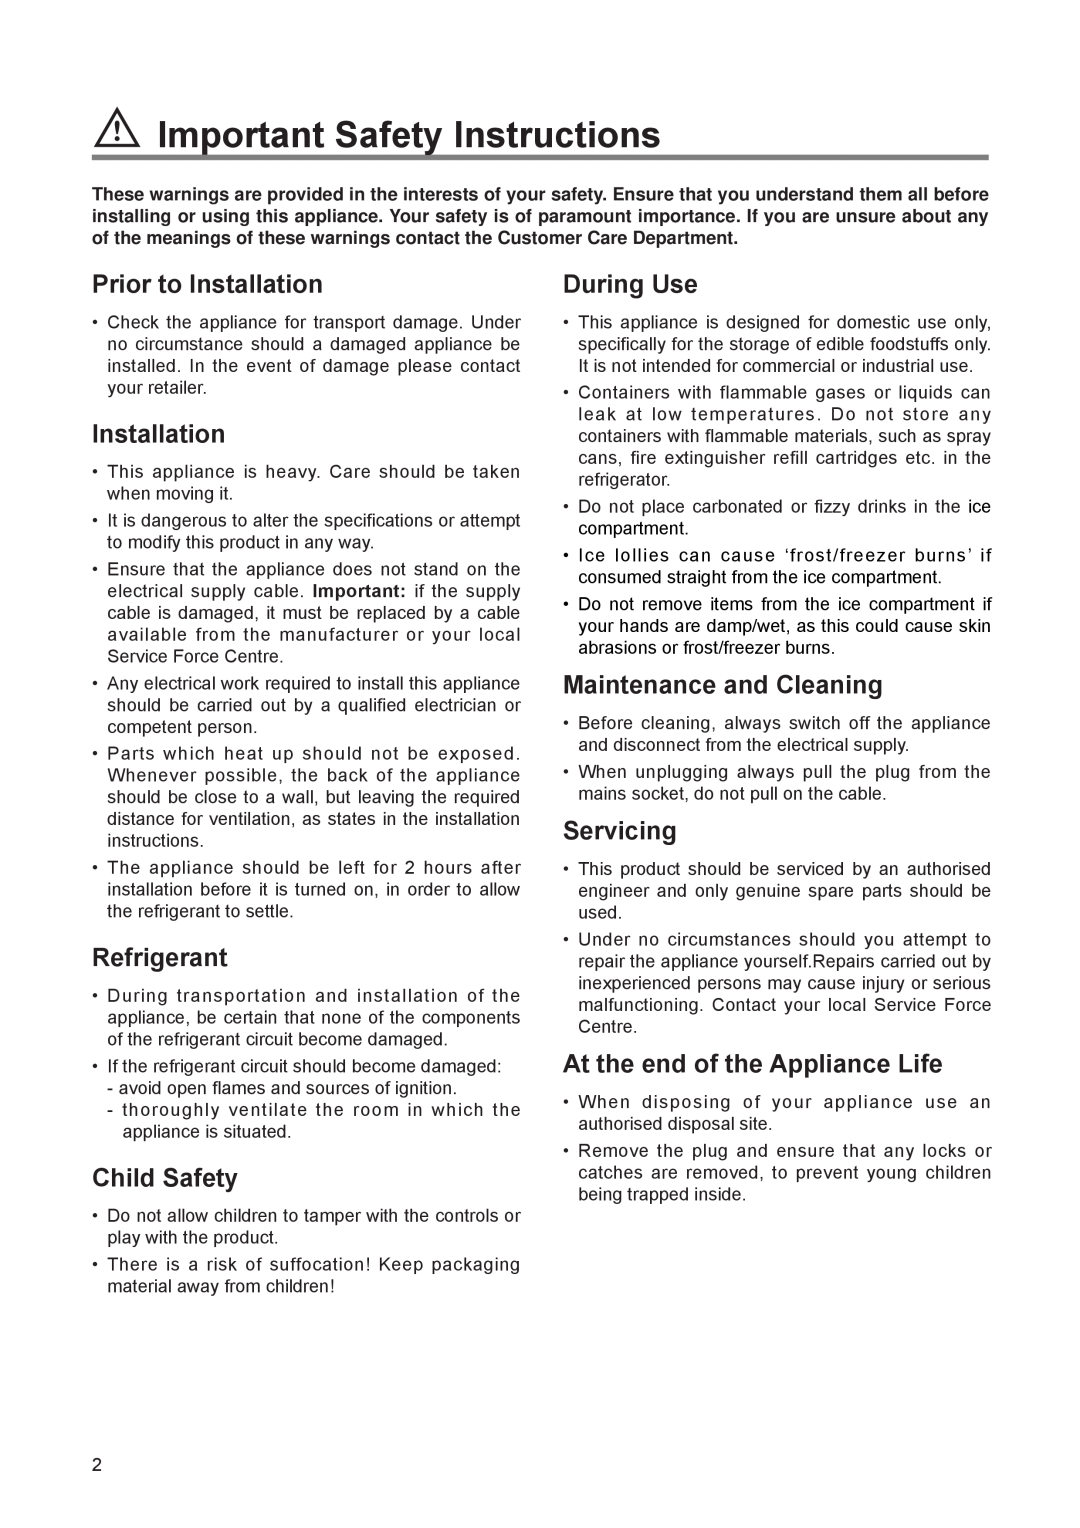 Zanussi ZER 140 W Important Safety Instructions, Prior to Installation, Refrigerant, Child Safety, During Use, Servicing 